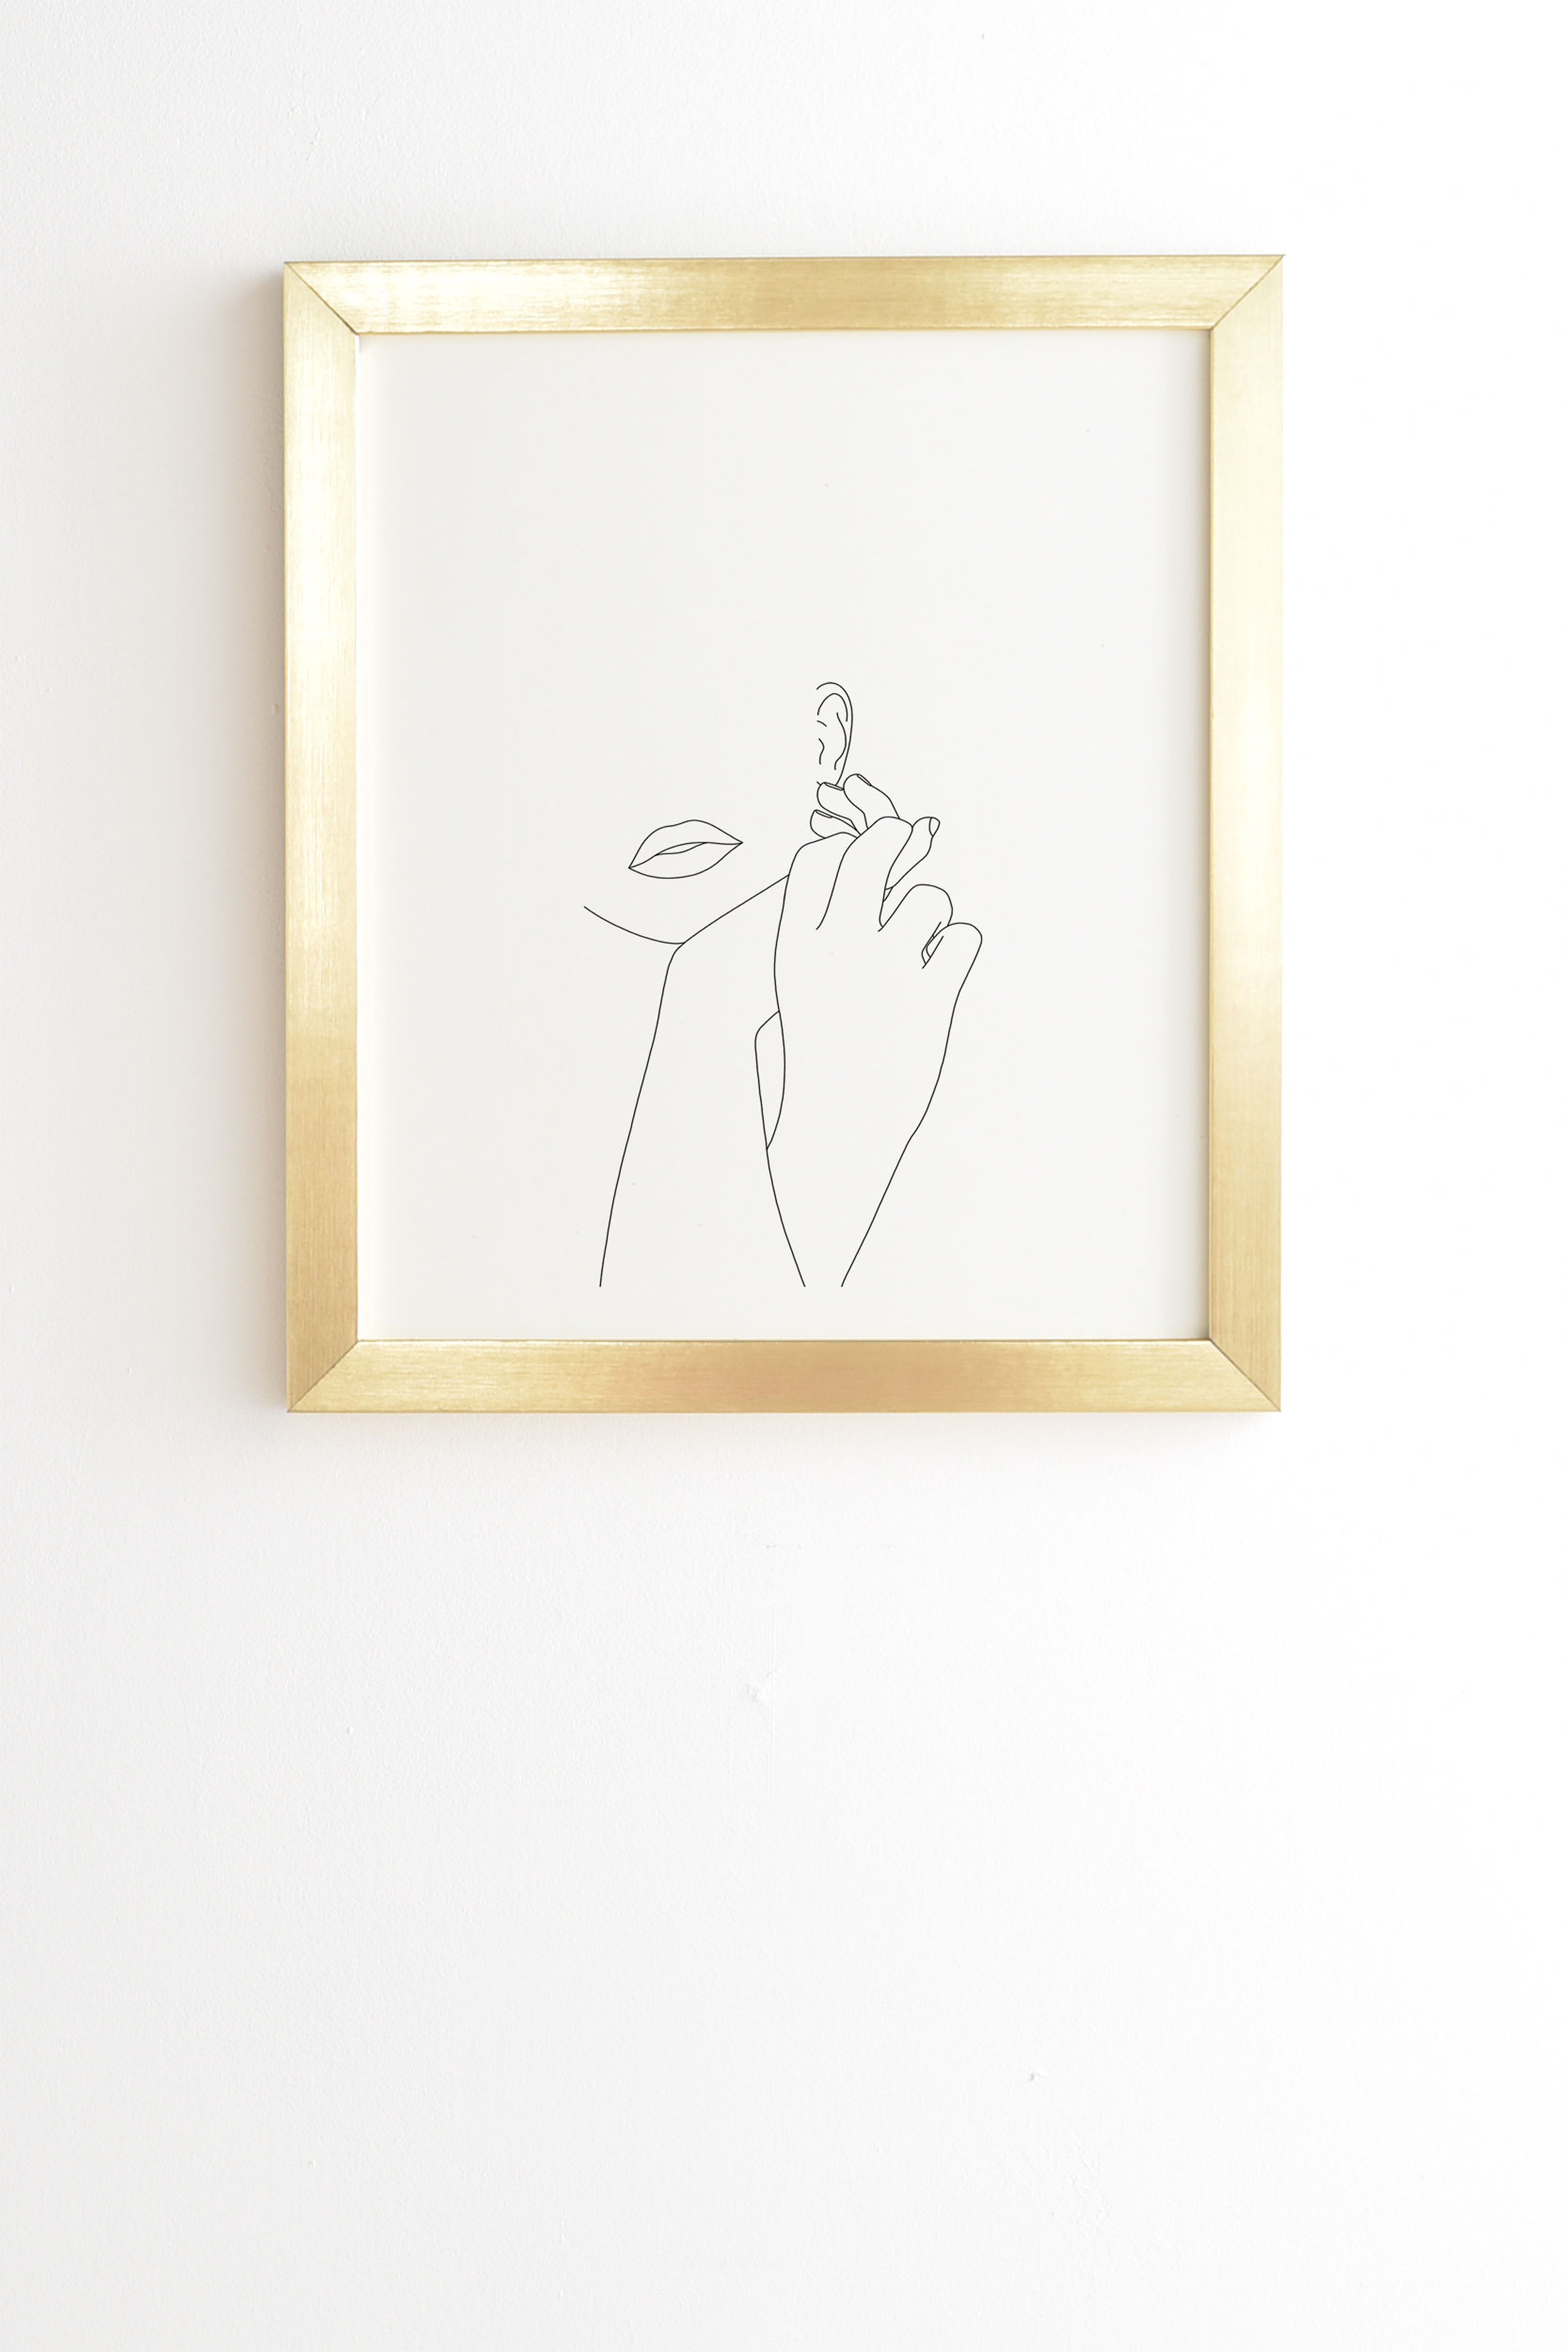 Minimalist Face Illustration by The Colour Study - Framed Wall Art Basic Gold 20" x 20" - Wander Print Co.